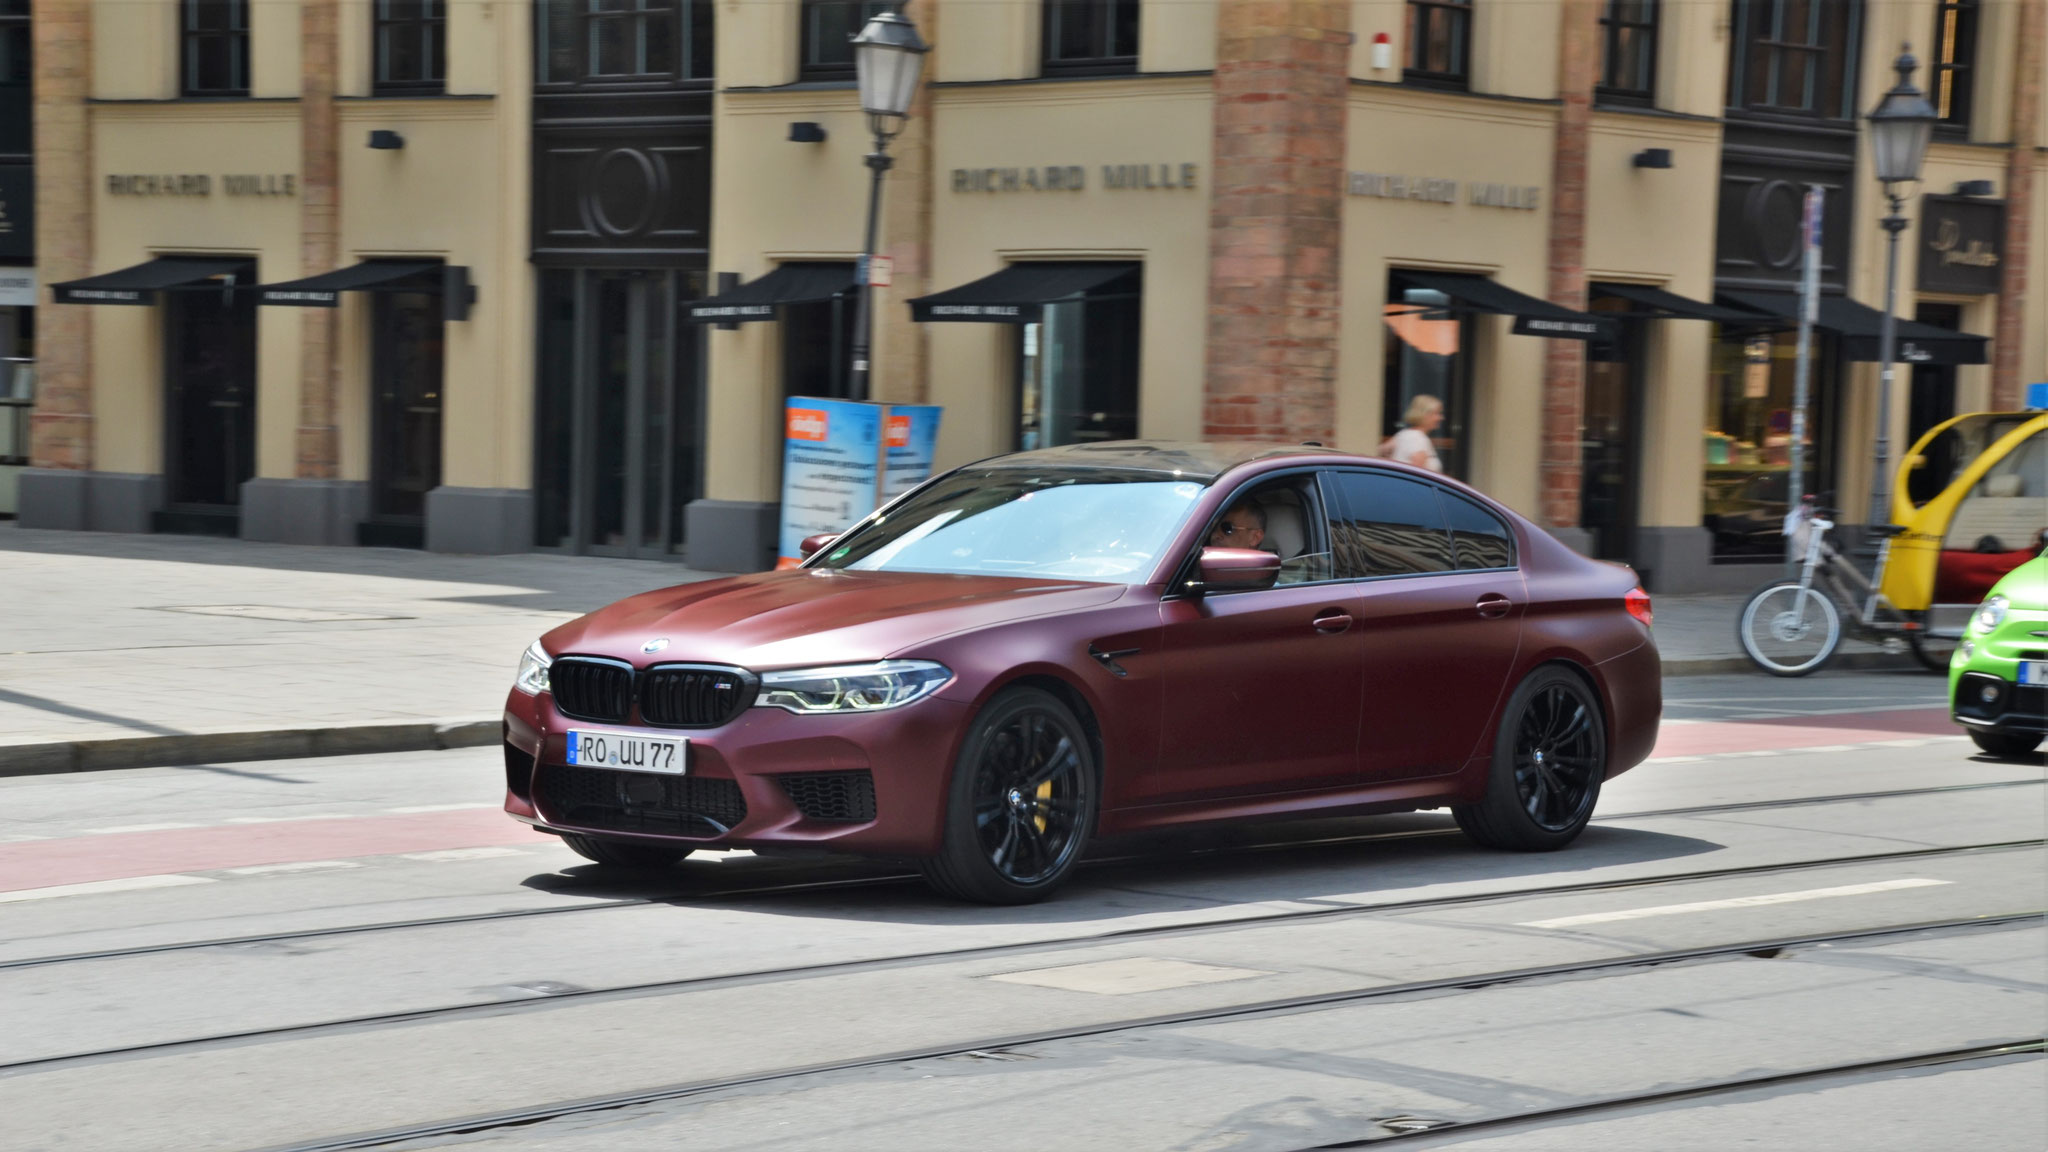 BMW M5 First Edition (1 of 400) - RO-UU-77